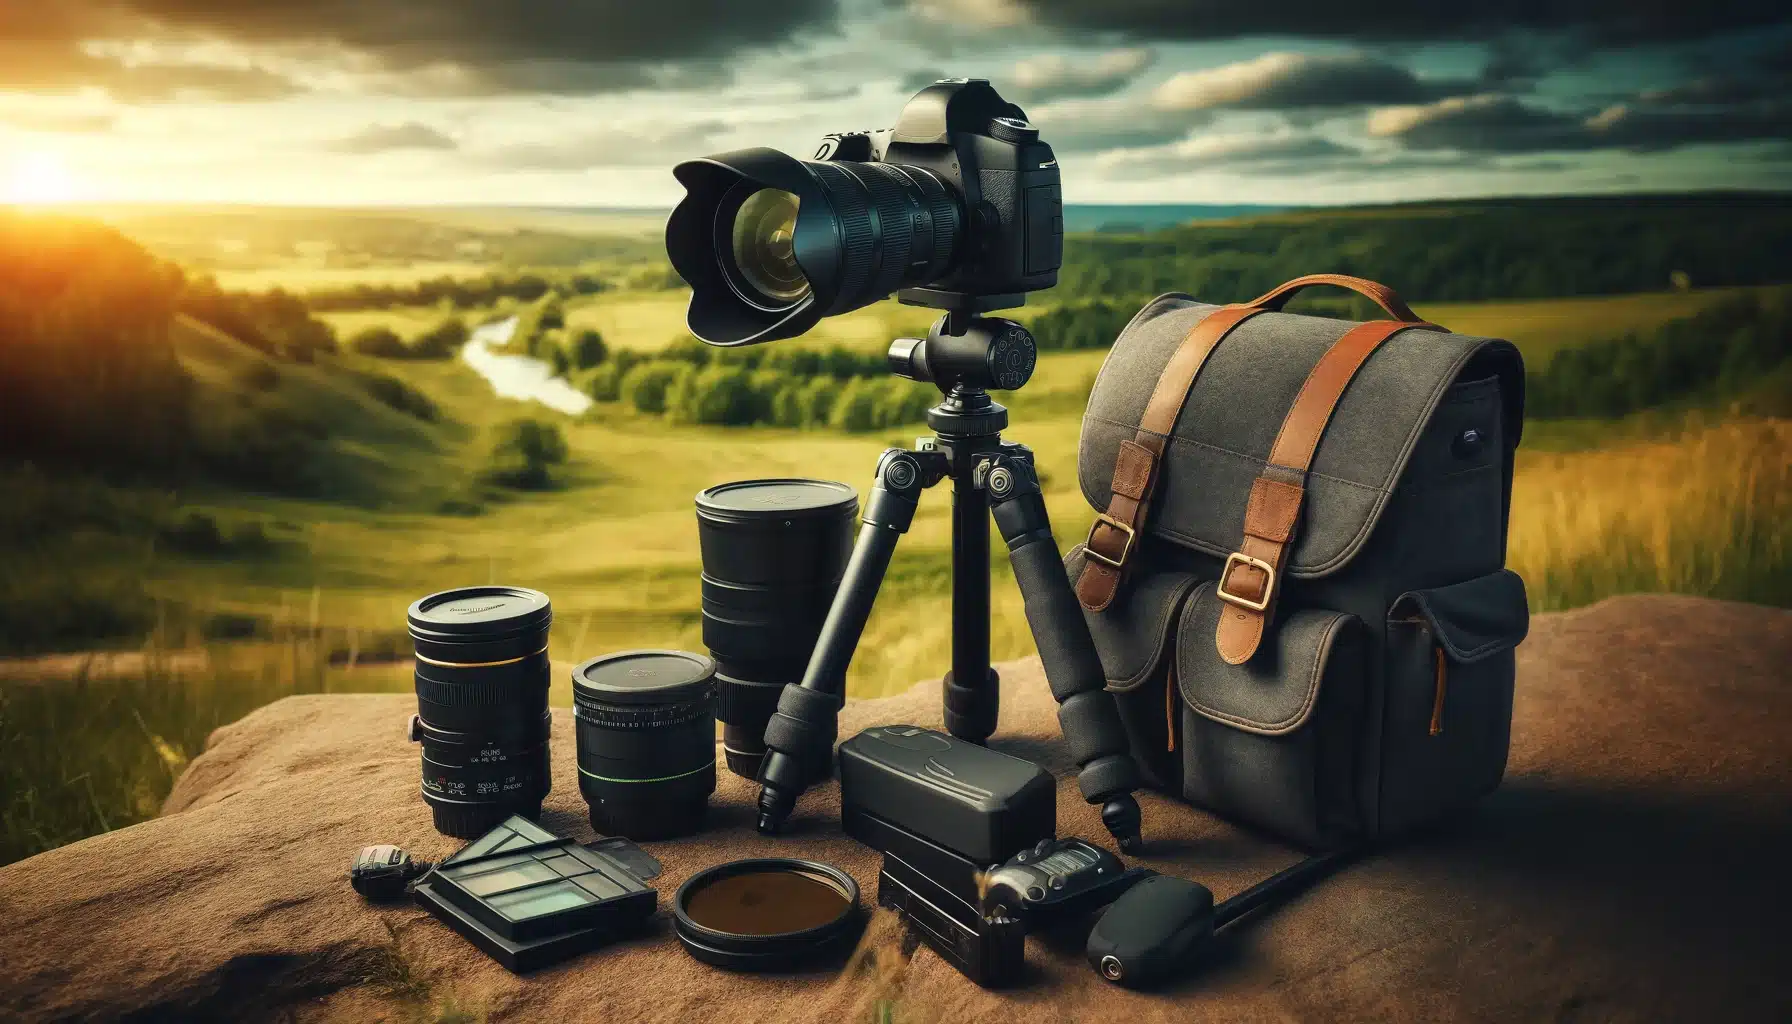 Photography equipment for long exposure landscape photography, including a DSLR camera, tripod, ND filters, remote shutter release, and camera bag, set up in a natural outdoor setting